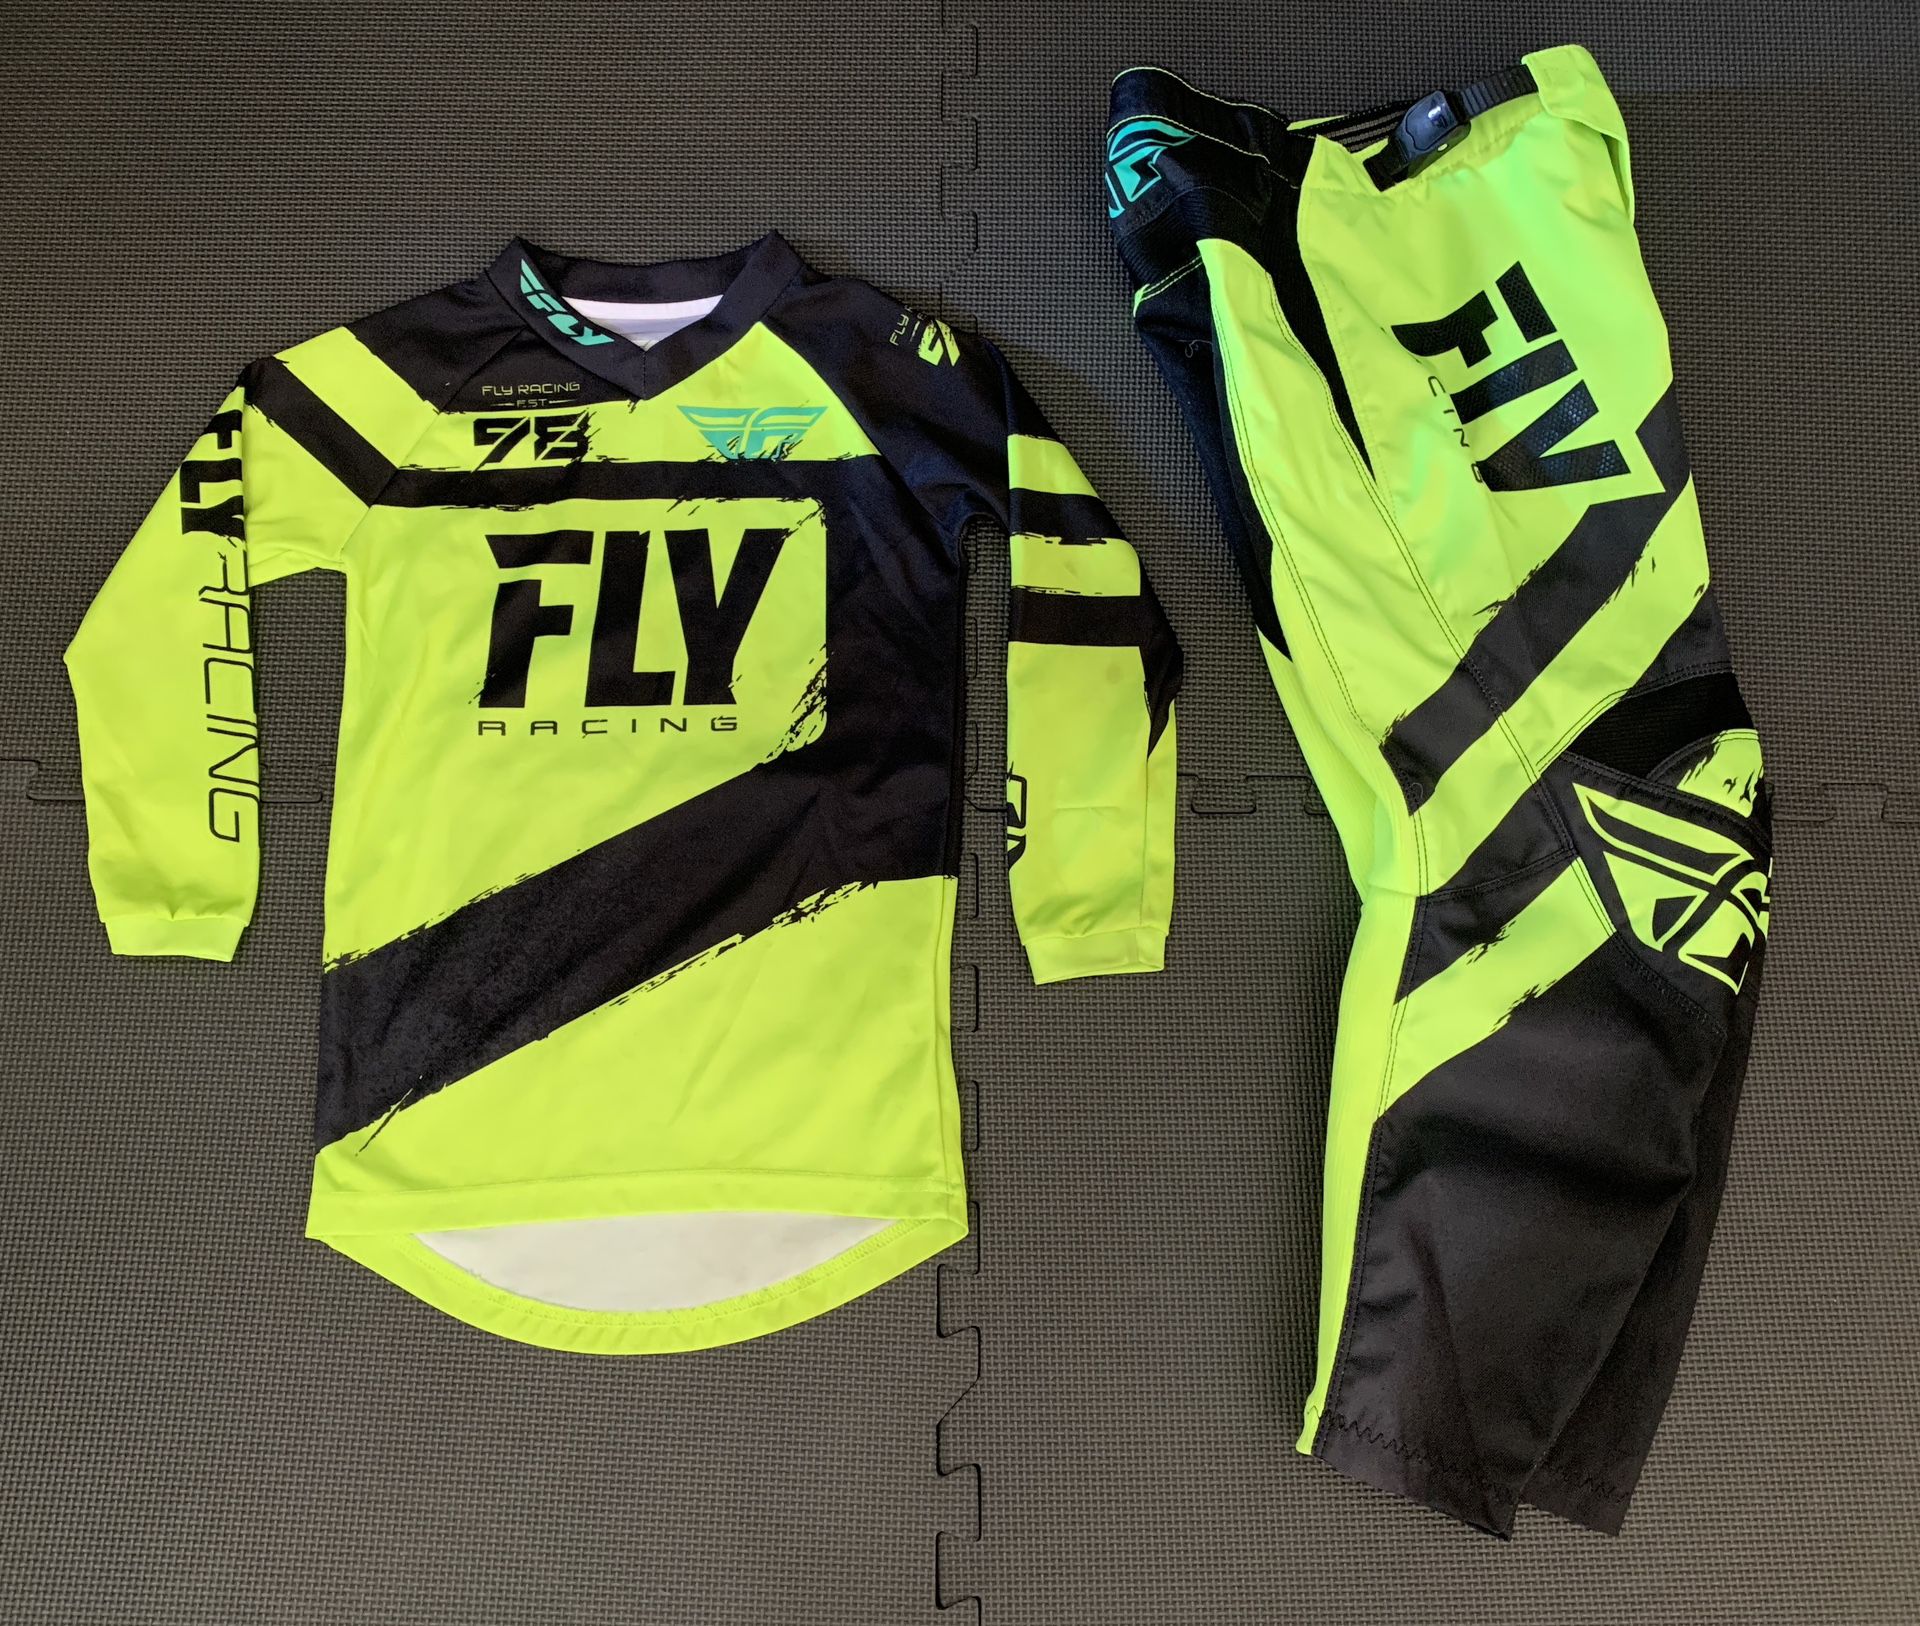 Youth Fly Racing Gear